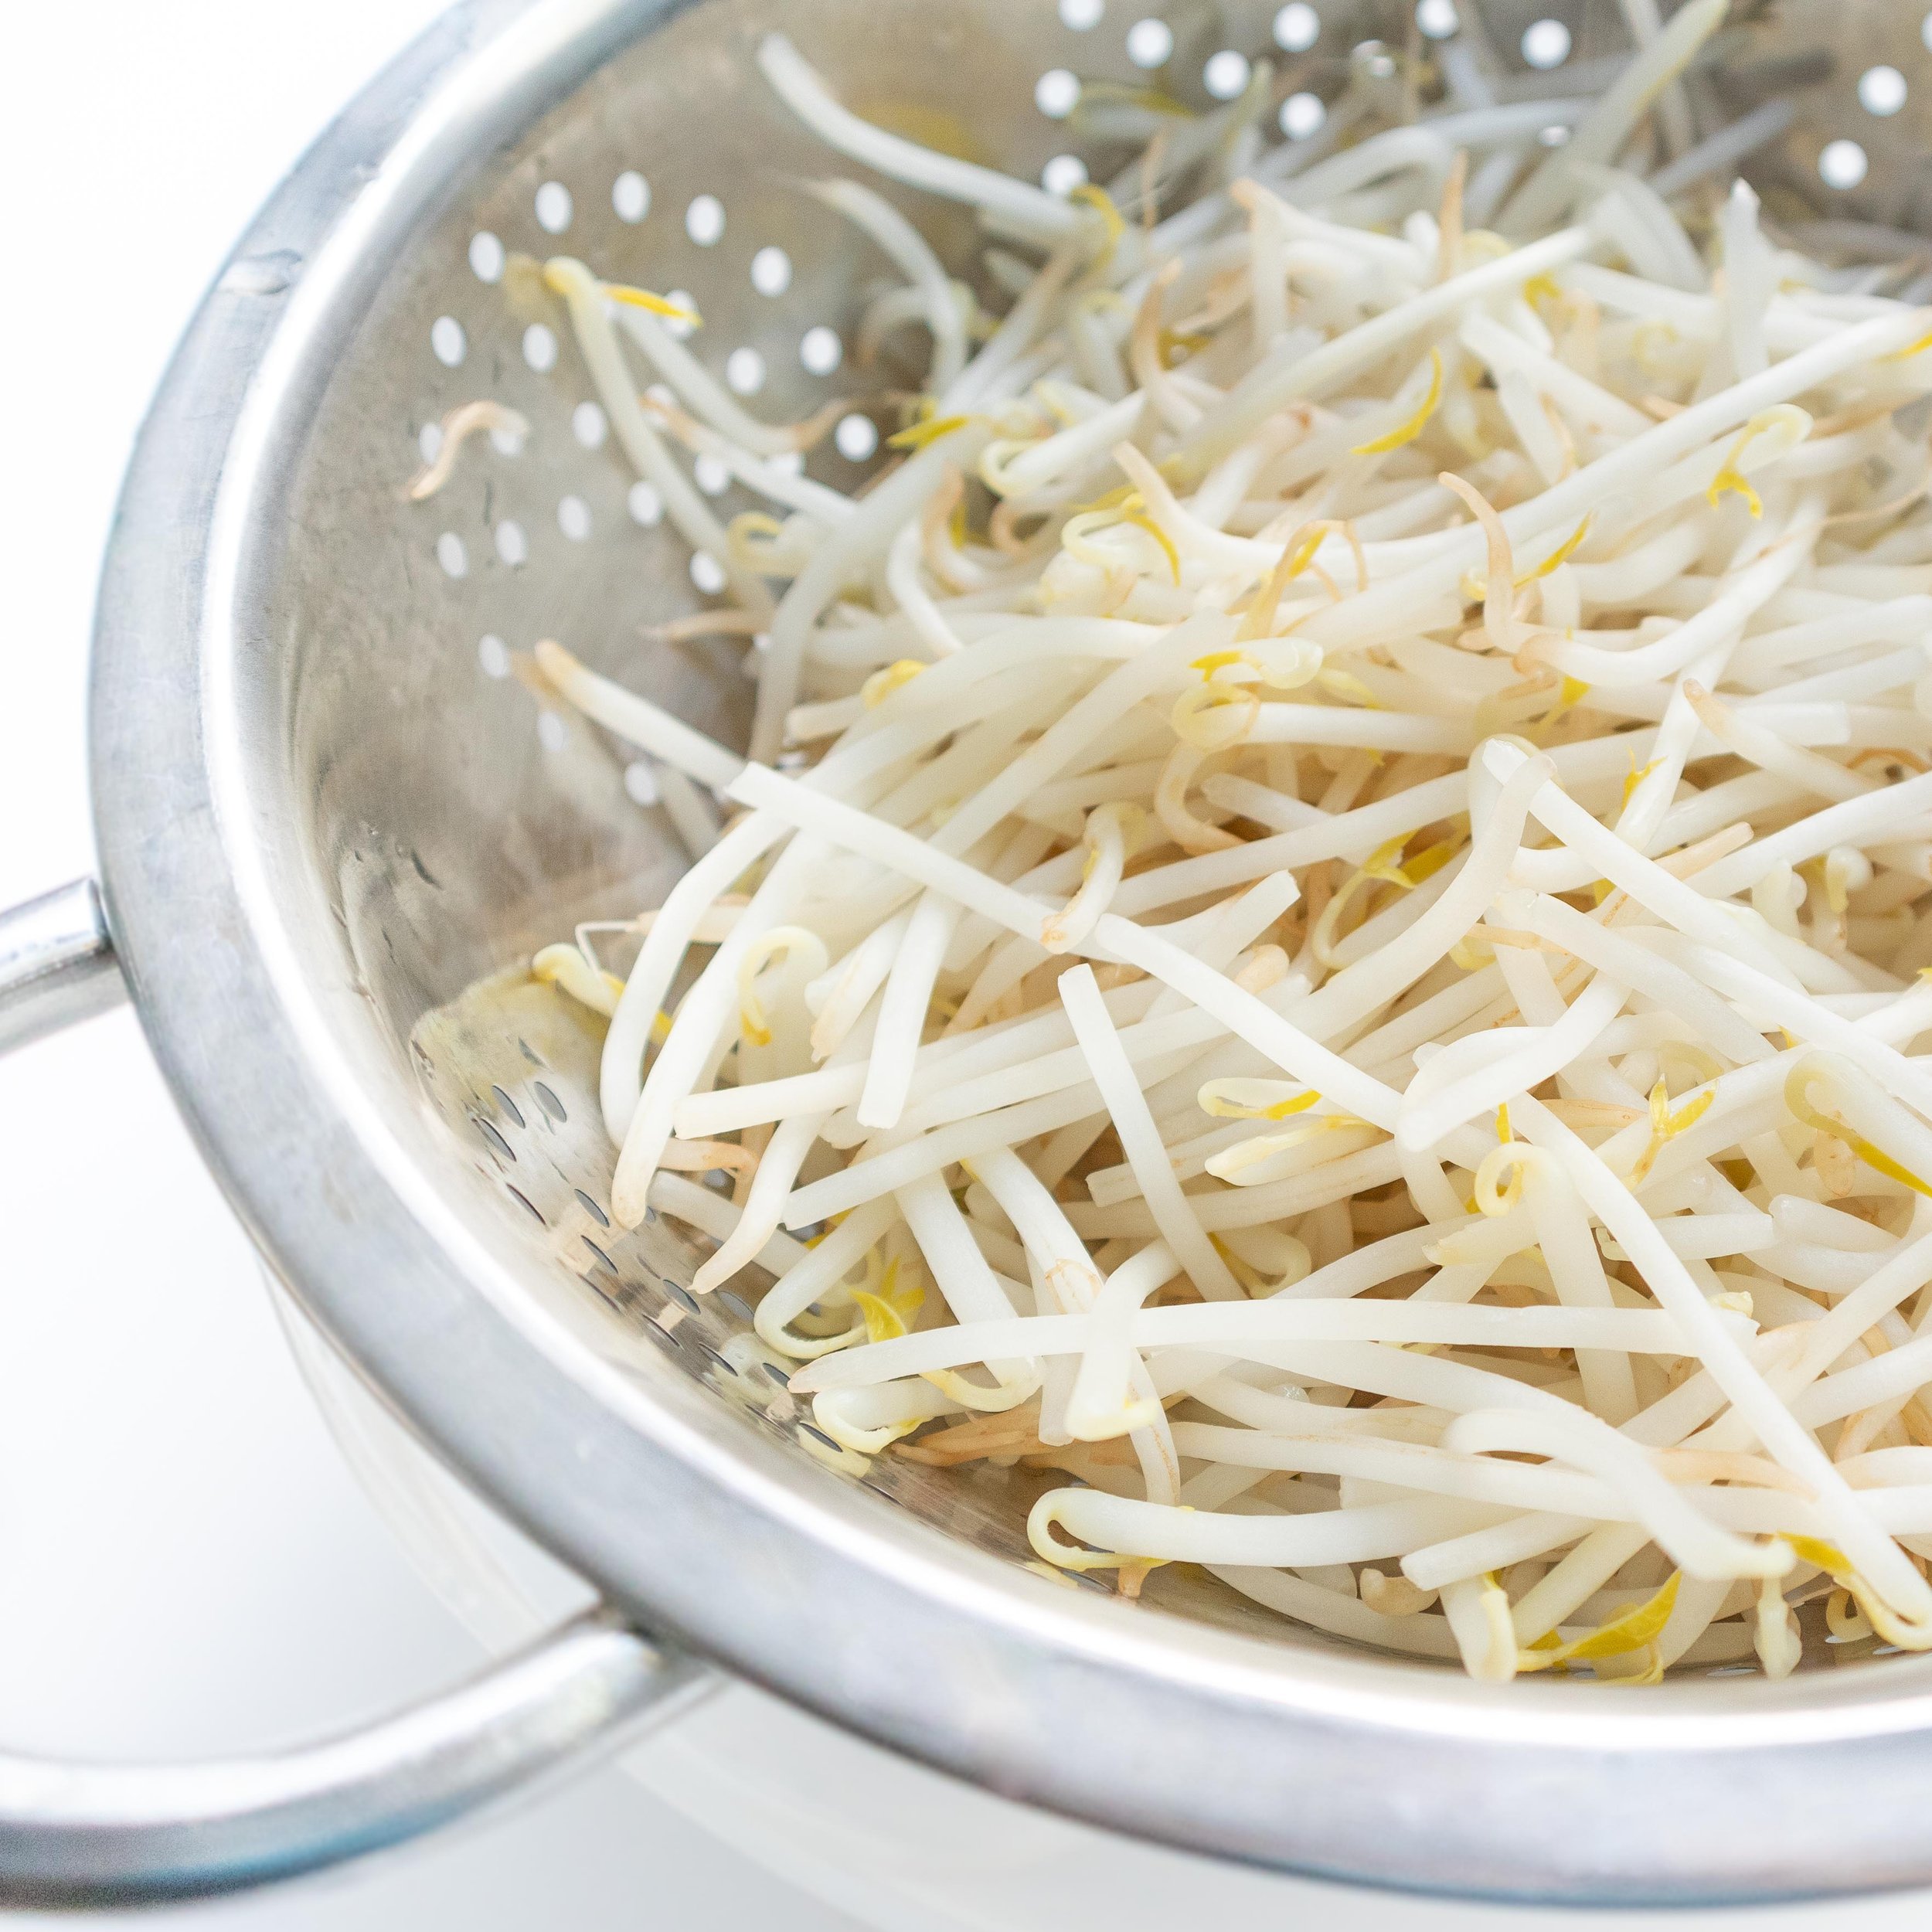 blanched bean sprouts